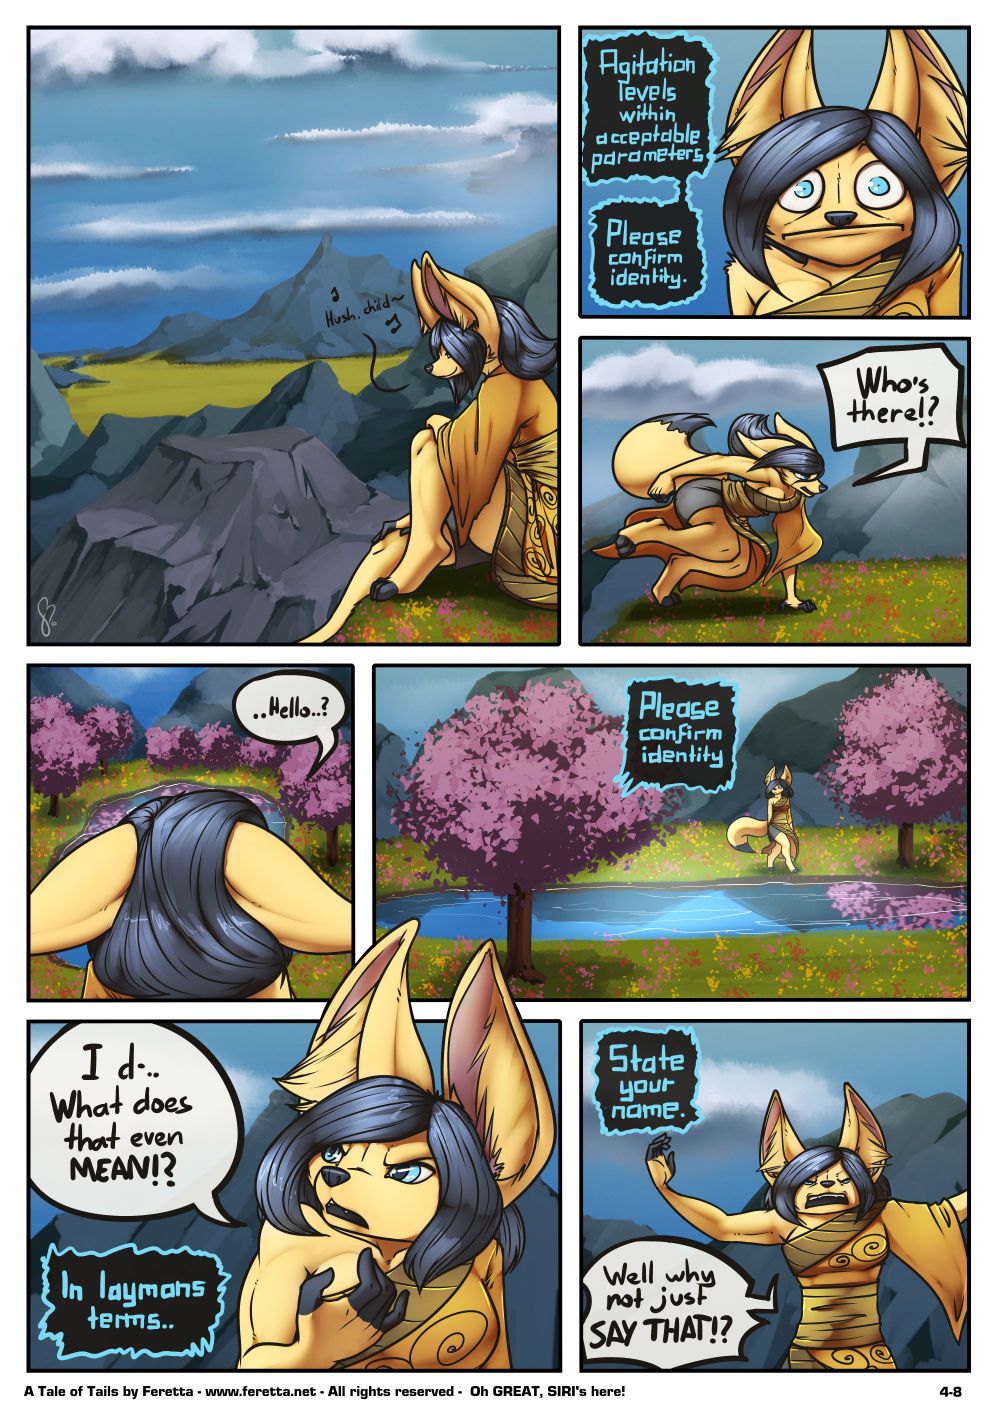 [Feretta] Farellian Legends: A Tale of Tails (w/Extras) [Ongoing] 158